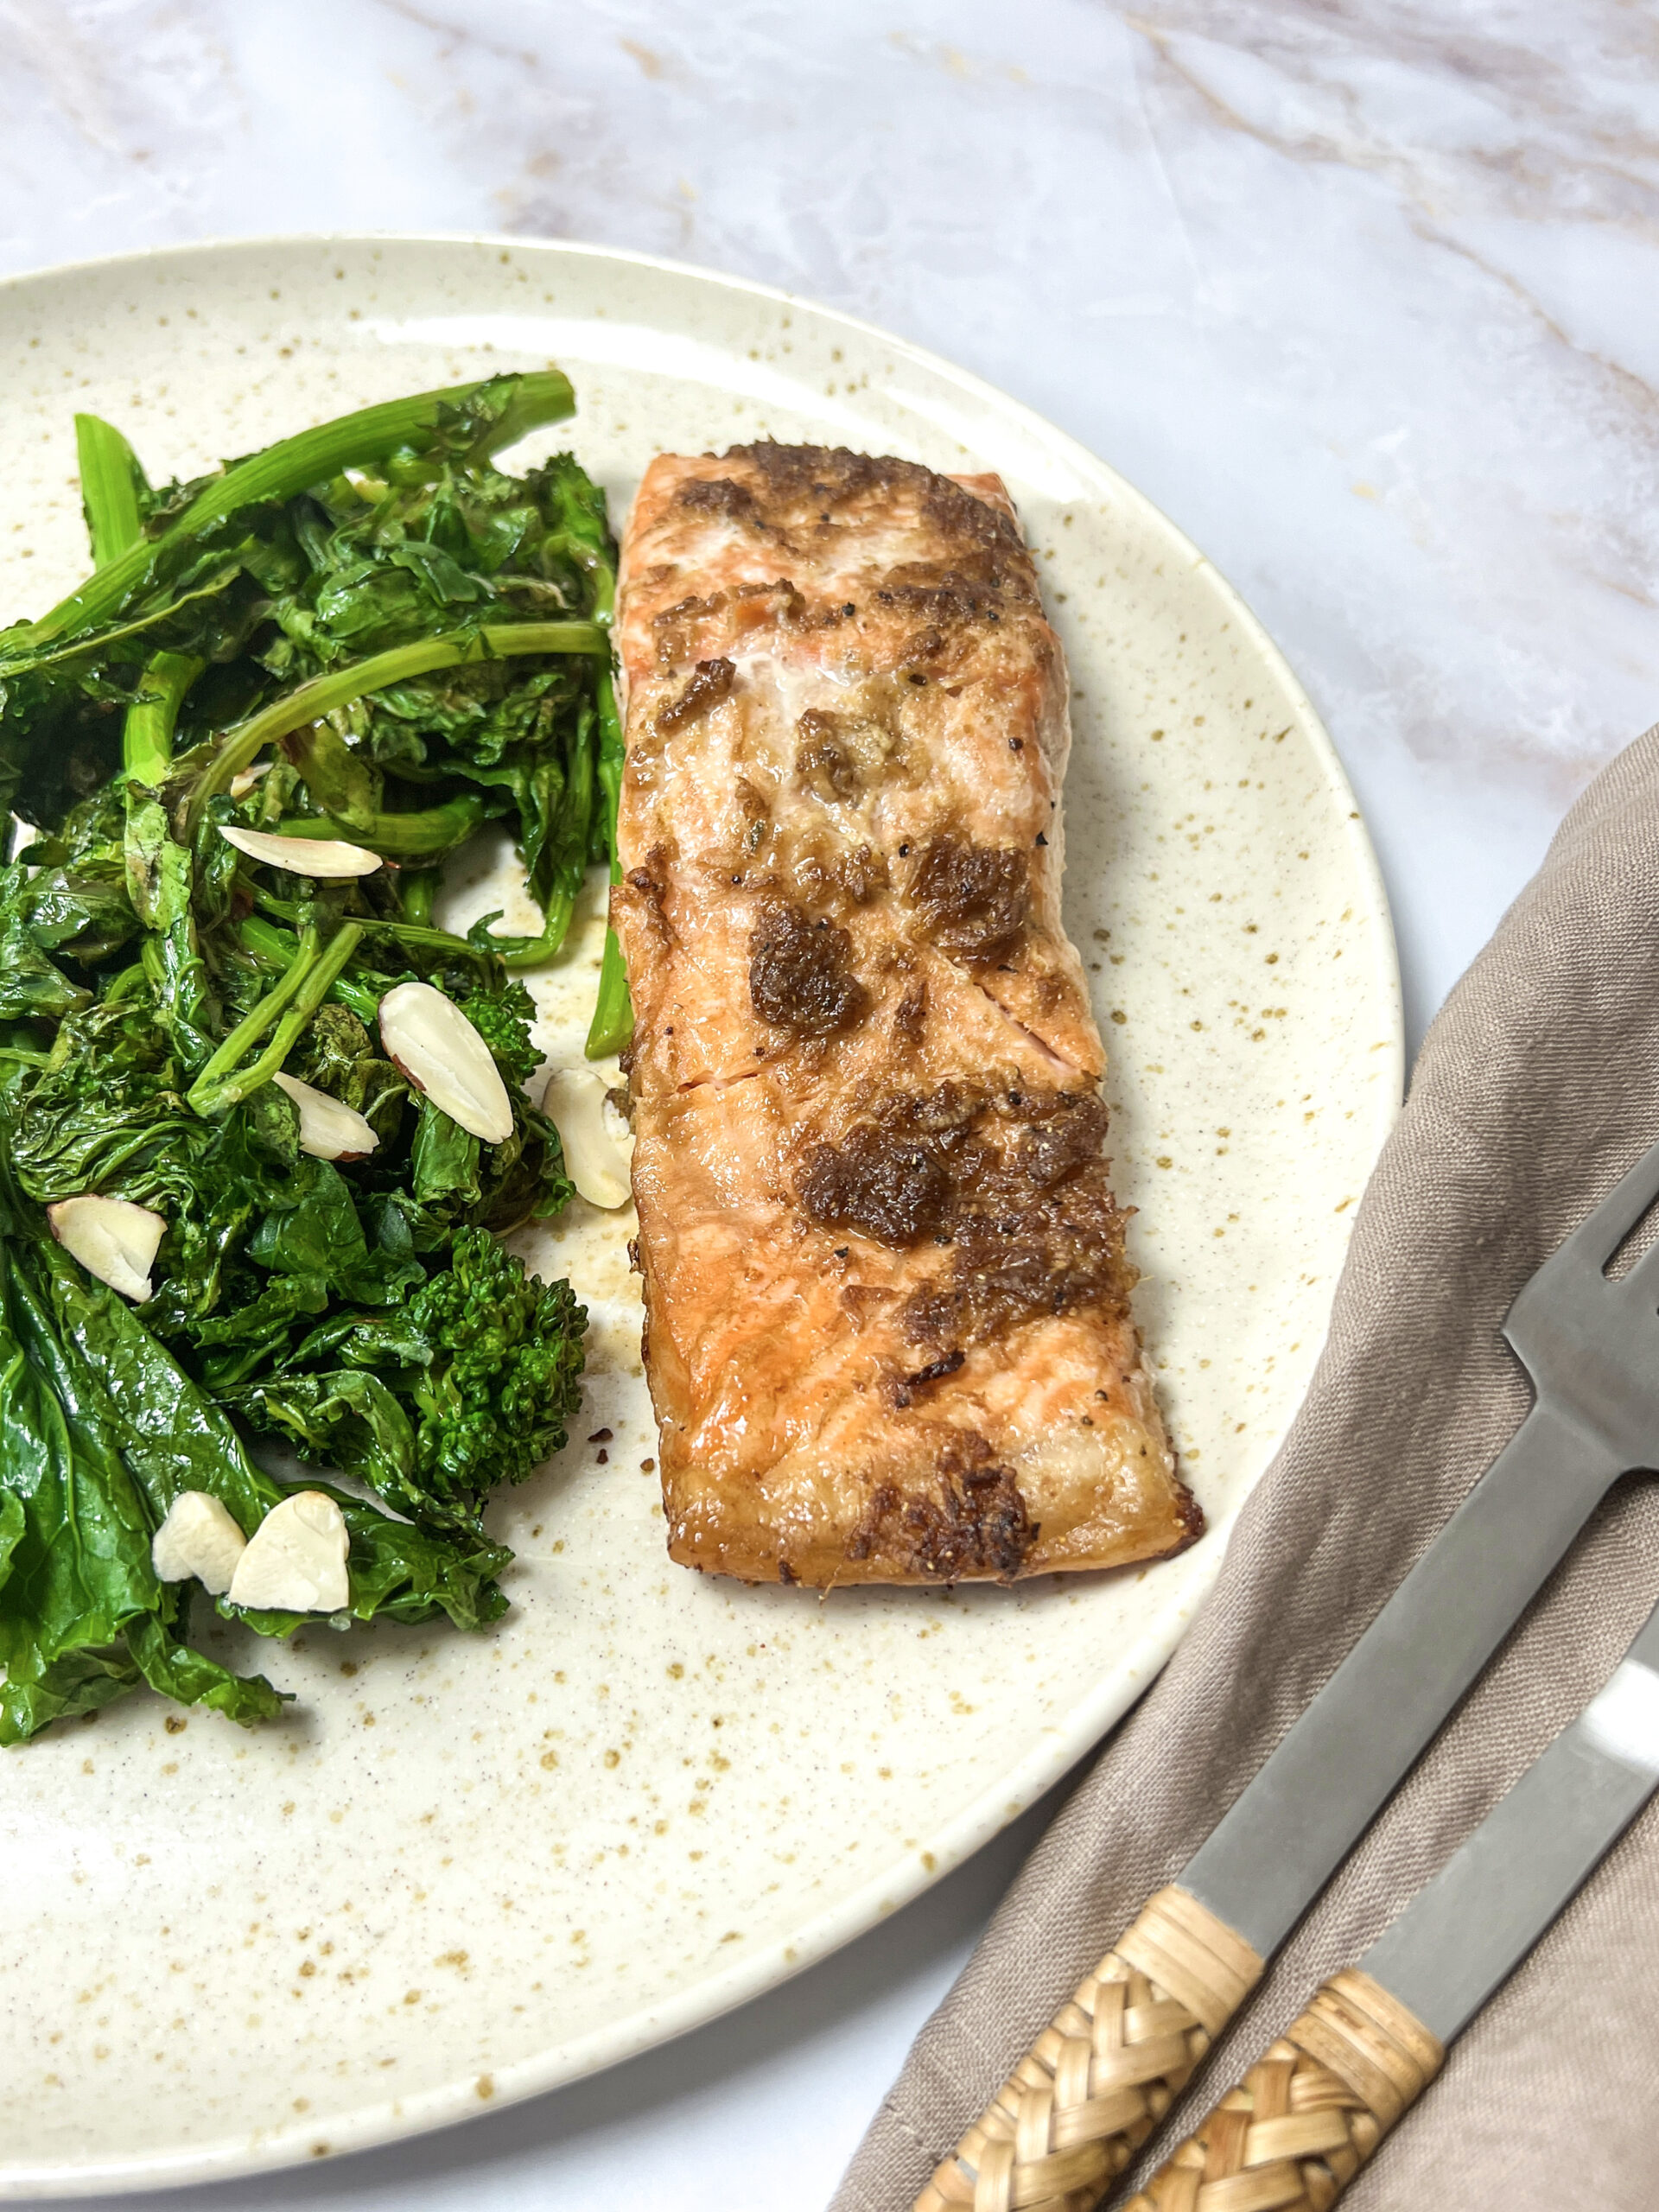 A Plateful of Goodness: Savoring Succulent Salmon with Roasted Broccoli Rabe. A mouthwatering feast for the senses